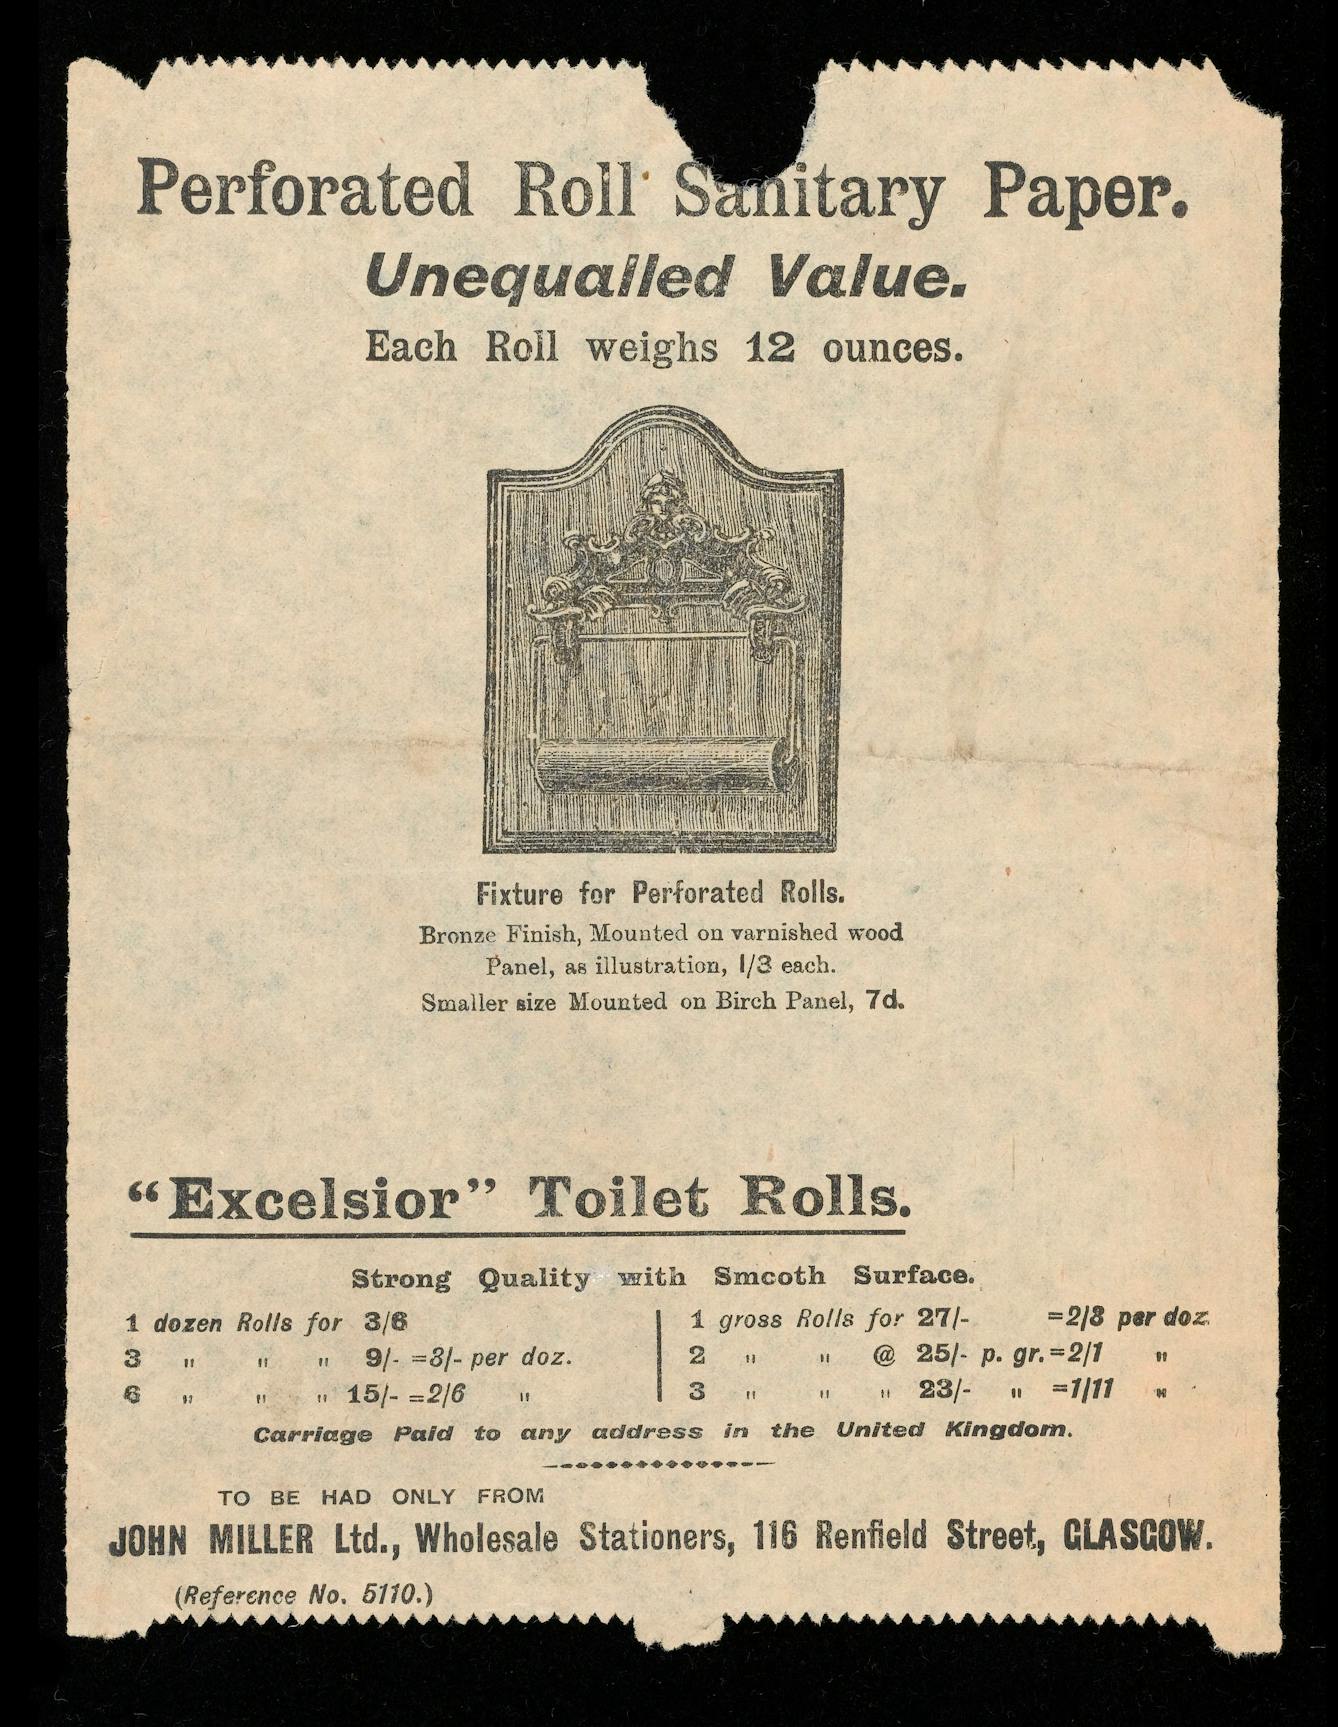 Photograph of a toilet paper sample sheet, bearing the title "Perforated Roll Sanitary Paper. Unequalled Value" and showing an image of a fixture to hold rolls. 